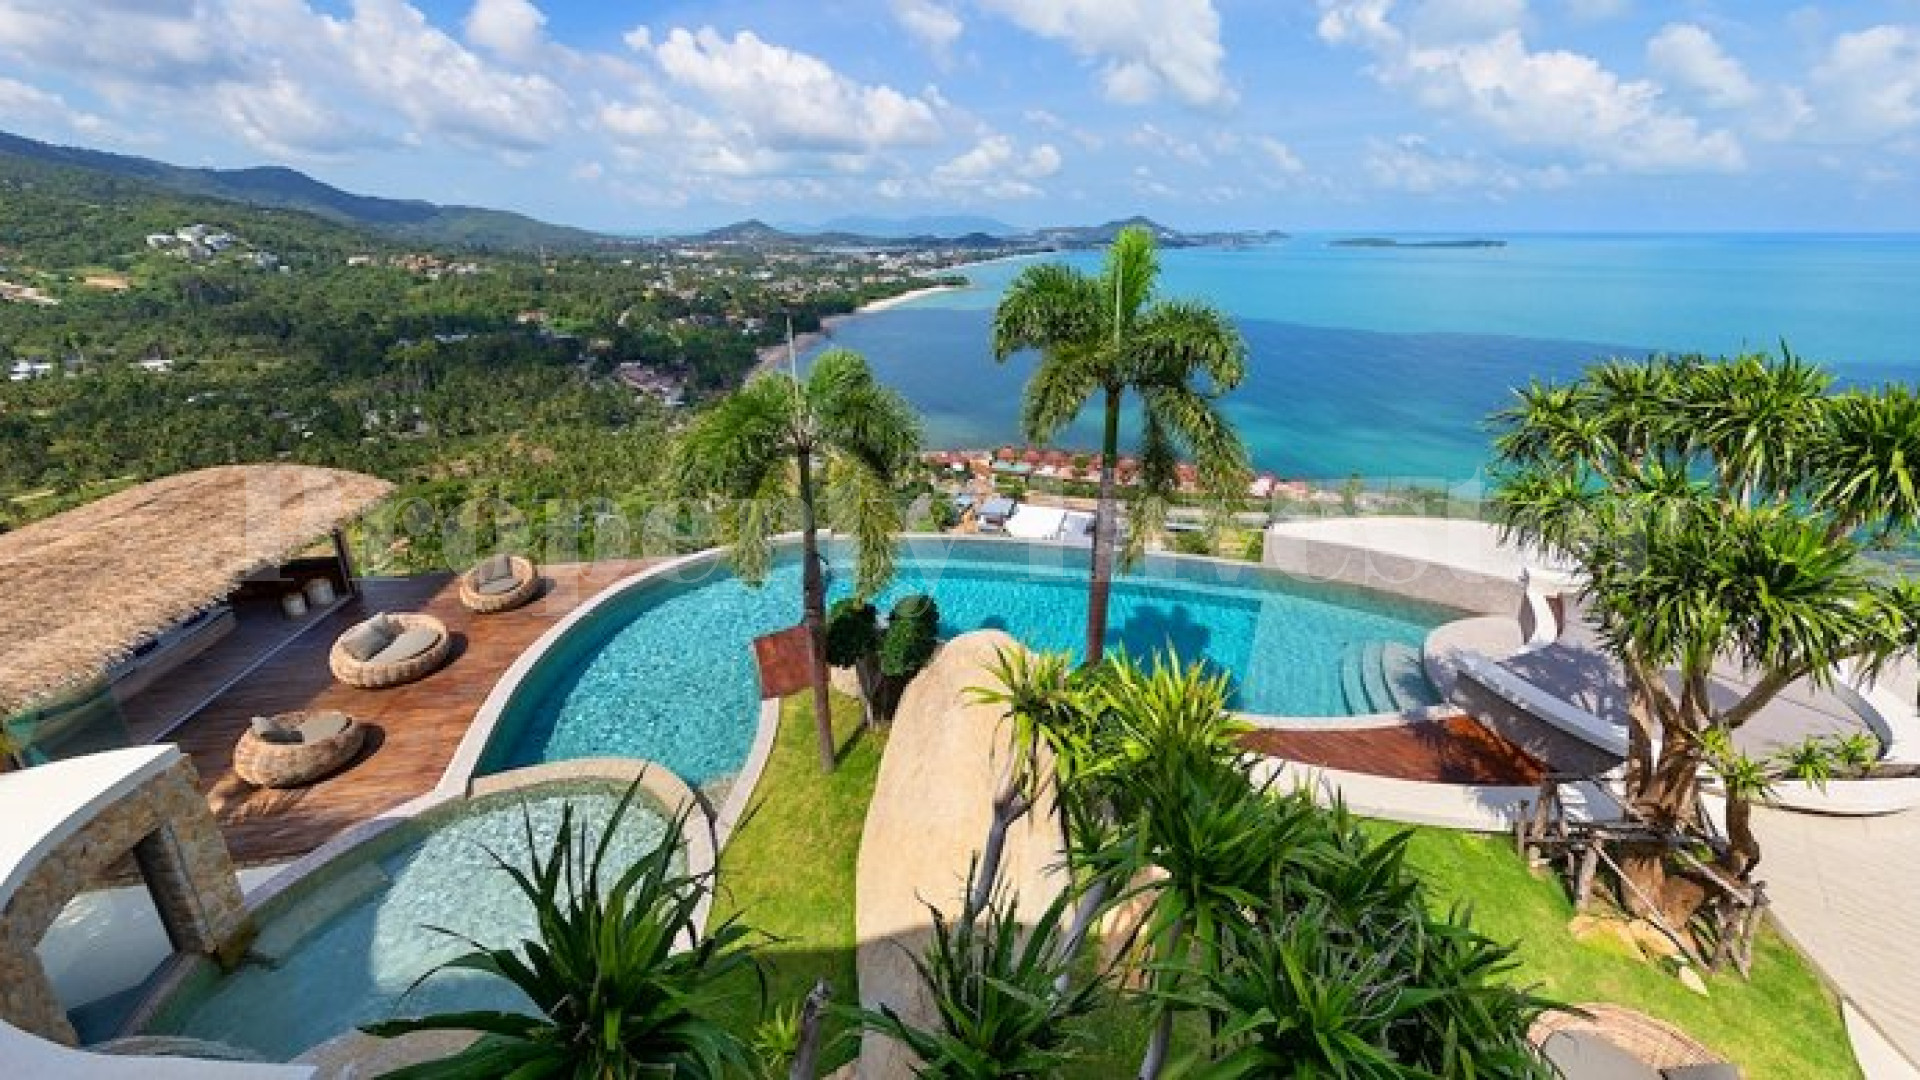 Spectacular 5 Bedroom Ultra-Luxury Seaview Villa with 360° Views for Sale on Chaweng Noi Peak, Koh Samui